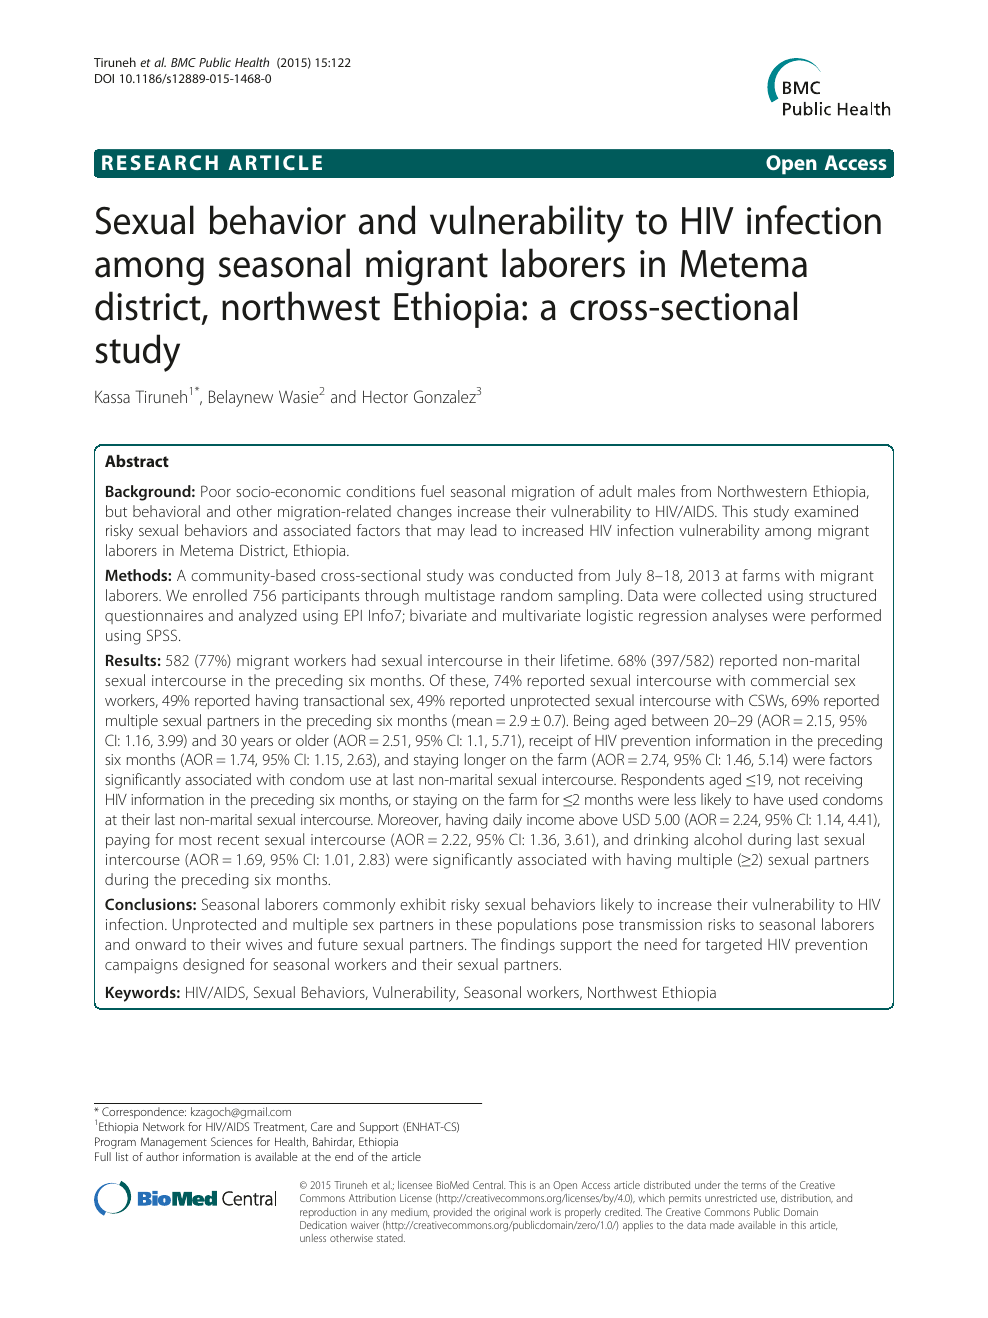 Sexual behavior and vulnerability to HIV infection among seasonal migrant laborers in Metema district, northwest Ethiopia a cross-sectional study